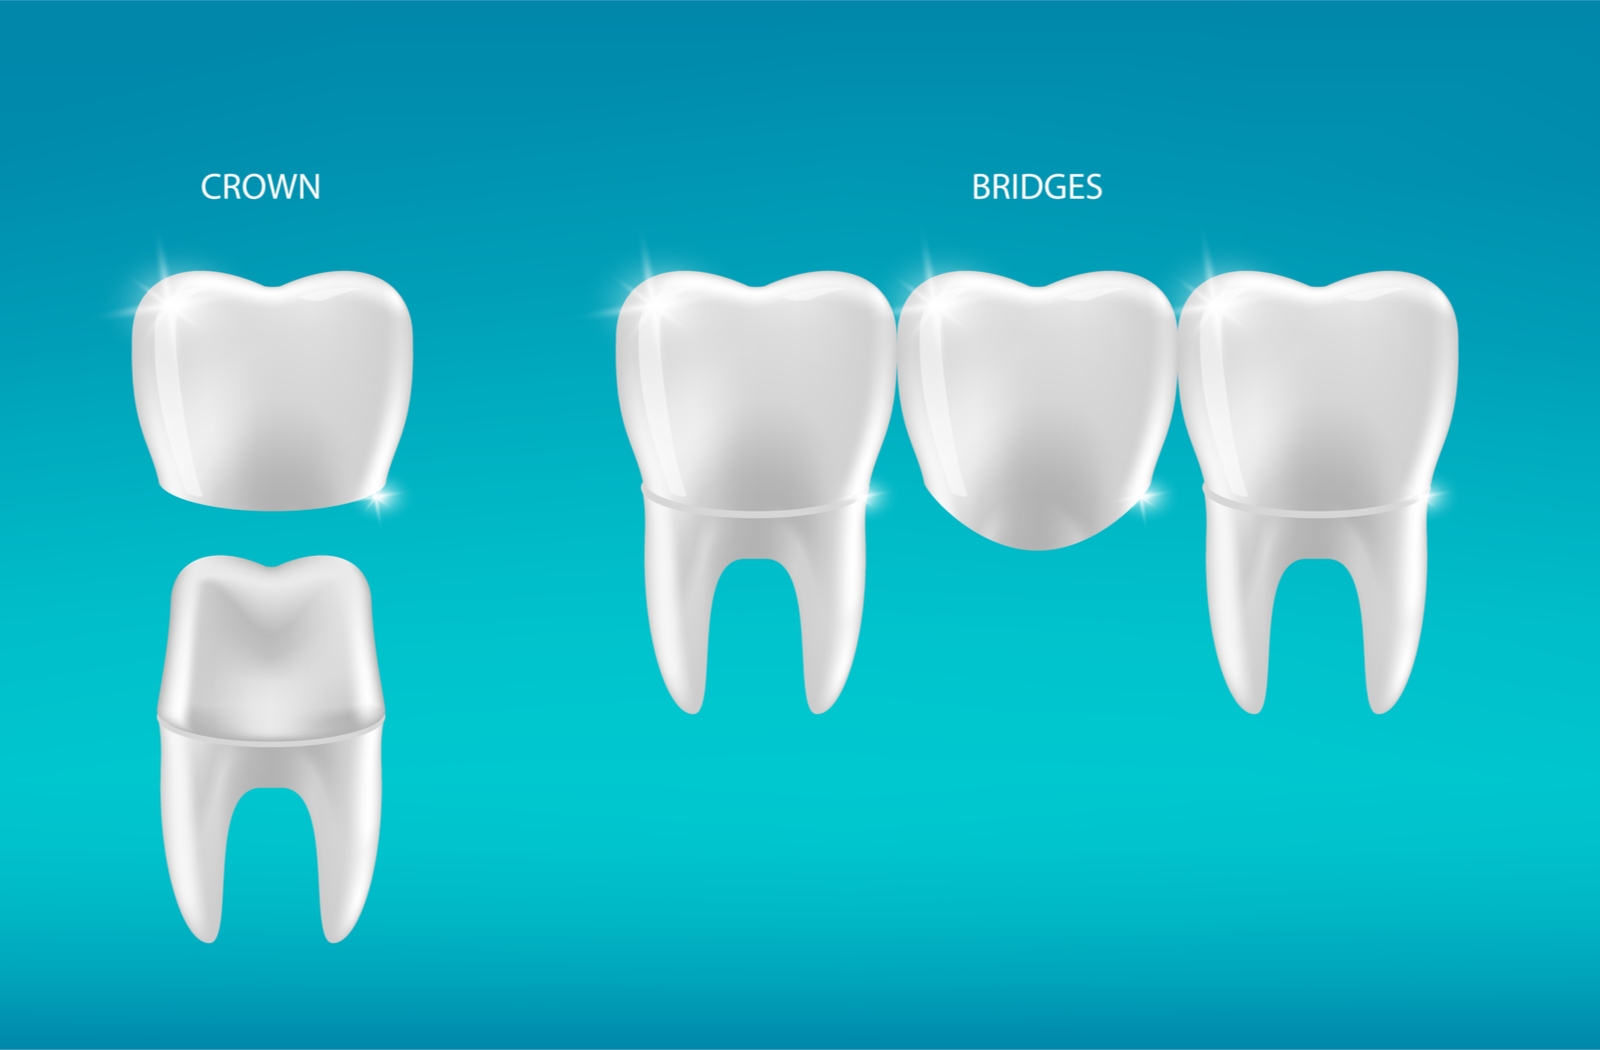 A illustration of a dental crown next to a dental bridge to highlight the difference between the two